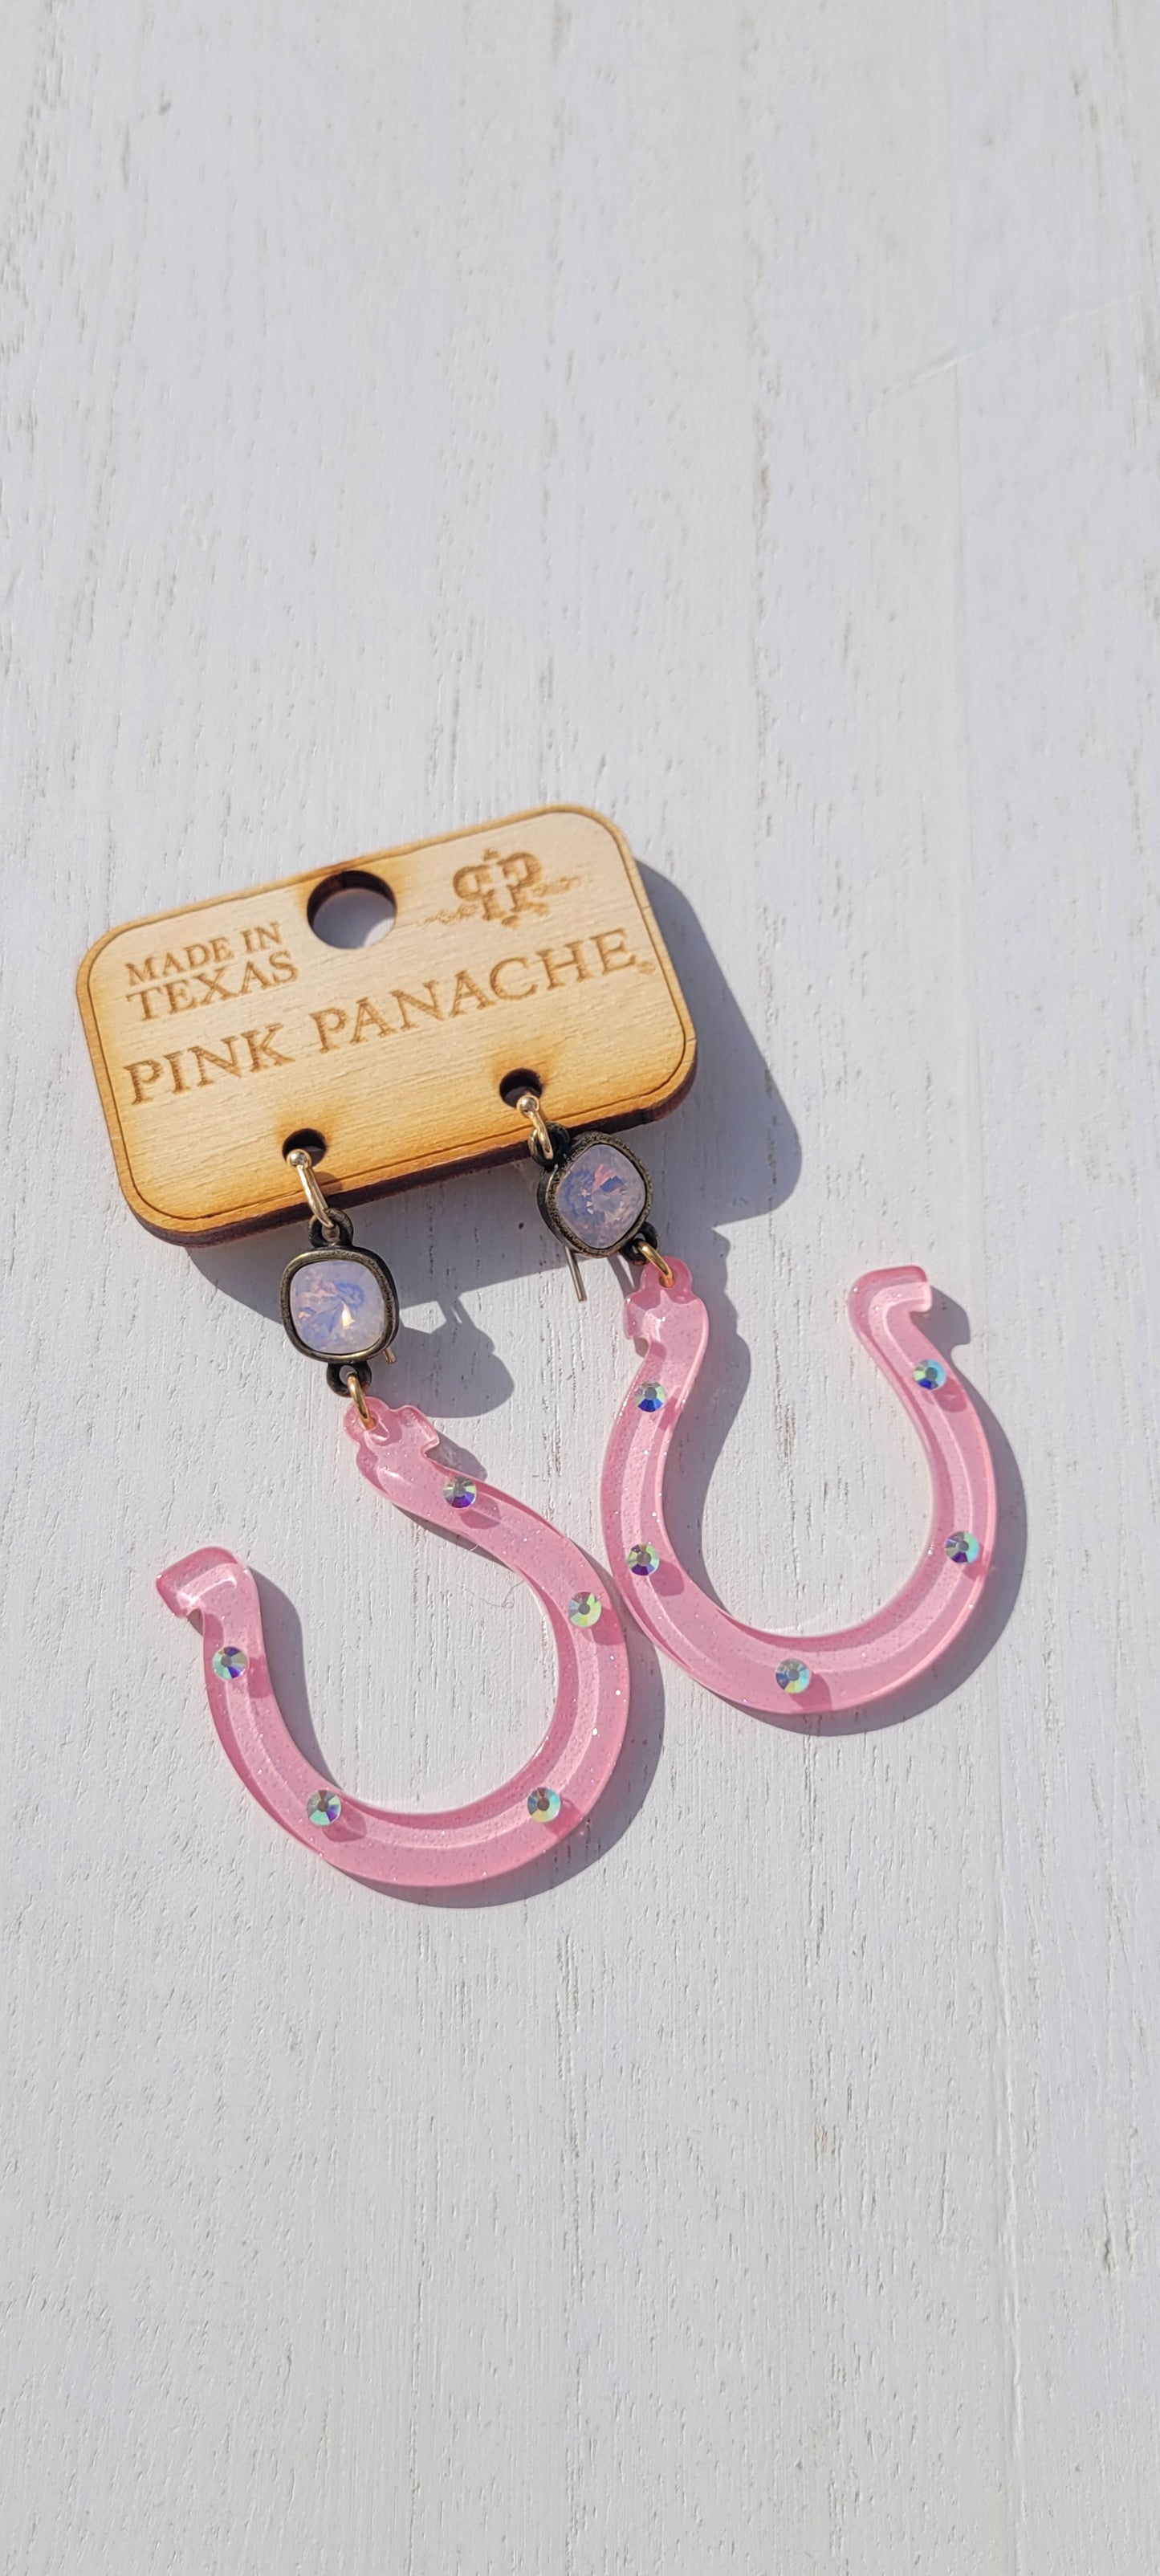 Pink Panache: Lucky "U" Horseshoe Earrings Pink Pink Panache Earrings Color: 8mm bronze/rosewater opal cushion cut connector on pink acrylic horseshoe earring Limited supply!